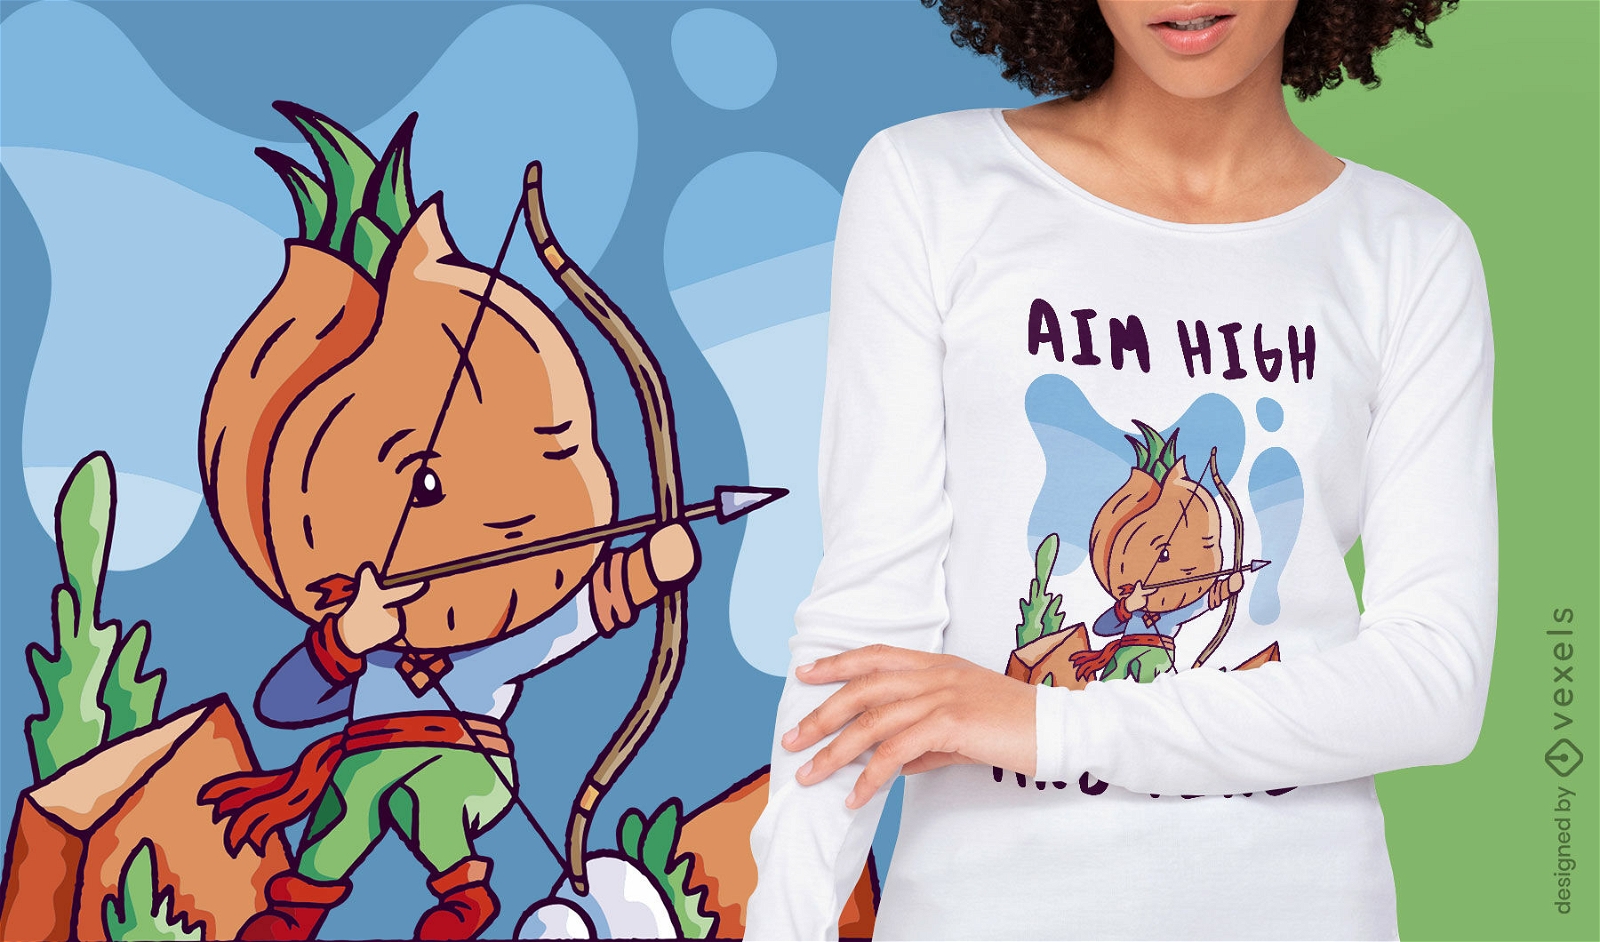 Medieval onion archer character t-shirt design